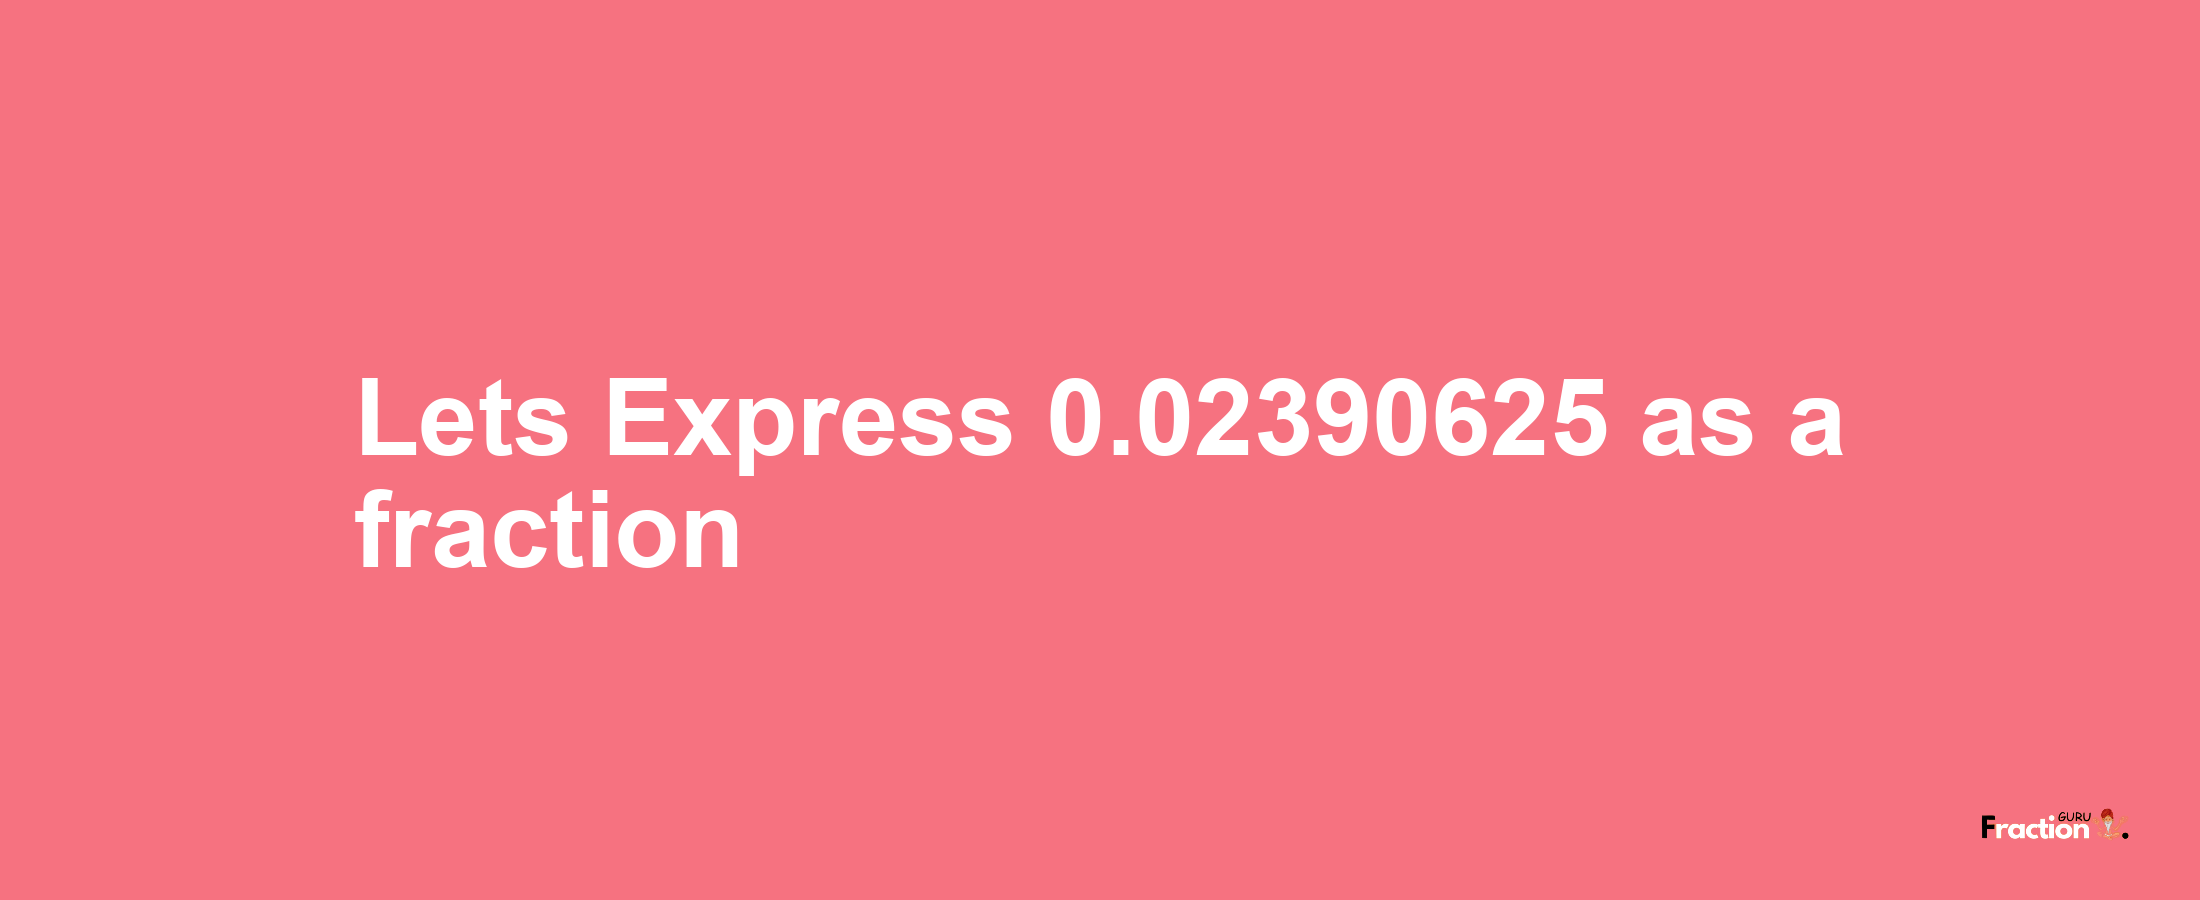 Lets Express 0.02390625 as afraction